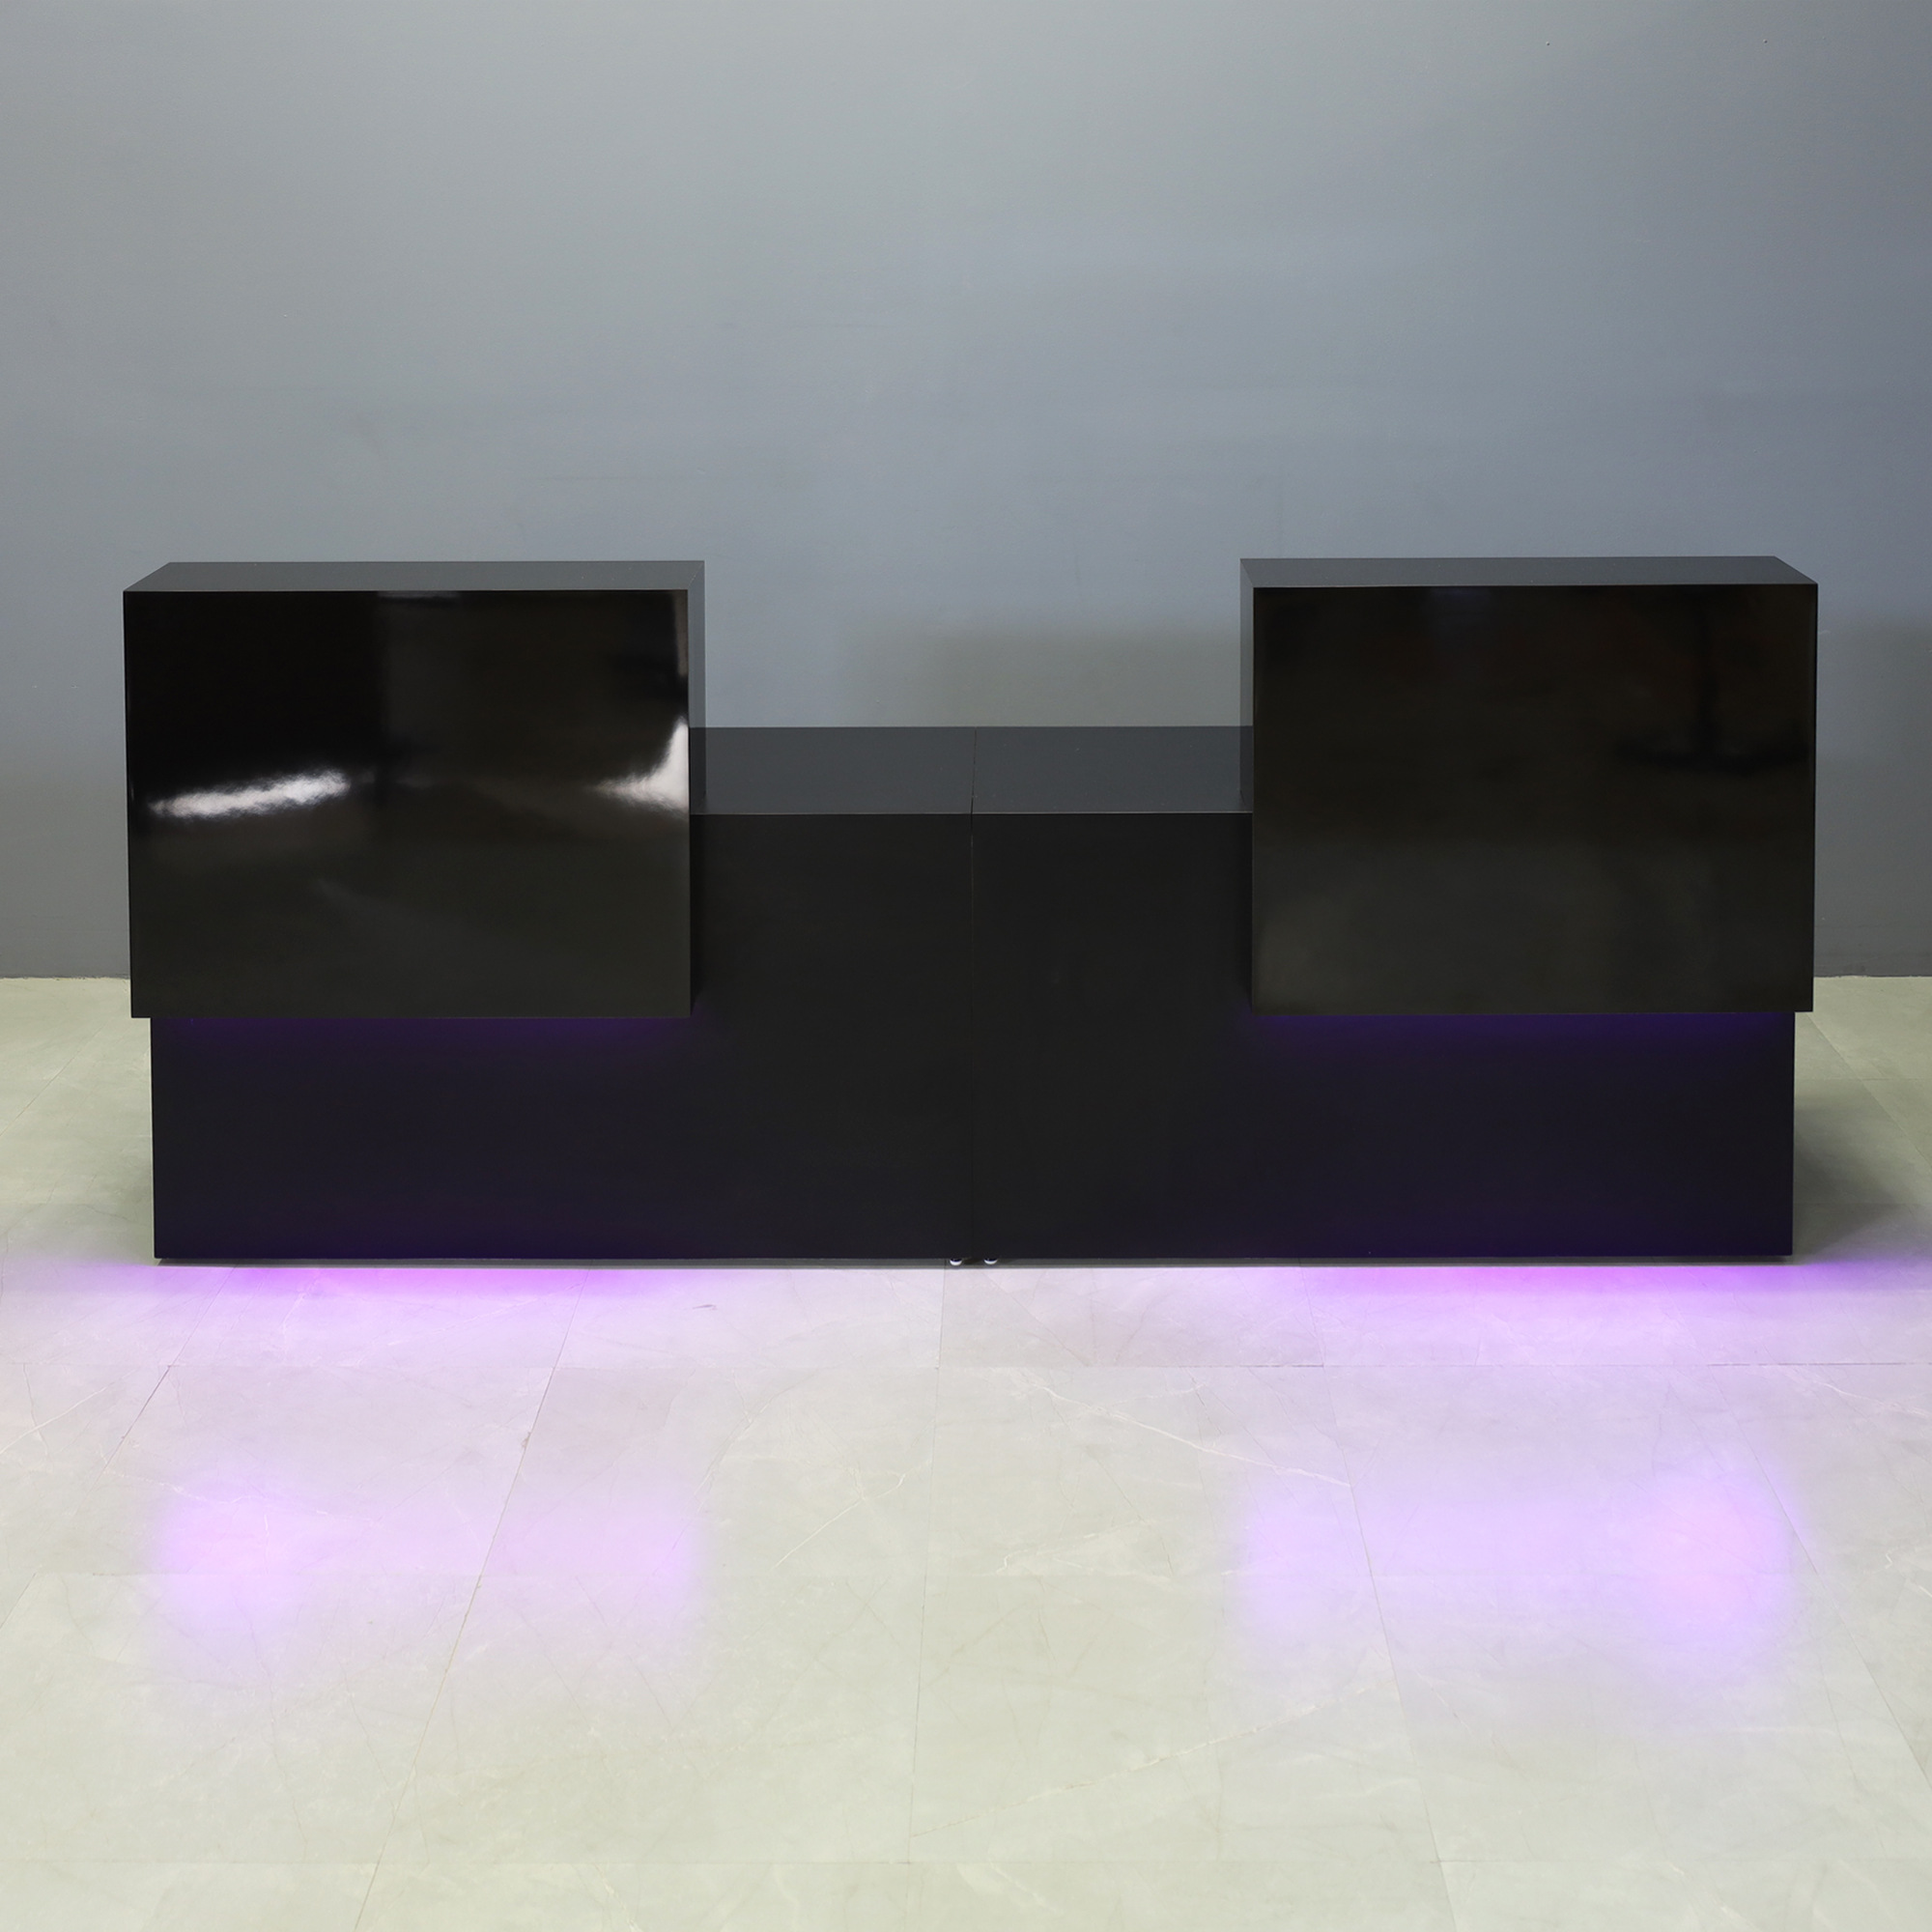 108-inch Los Angeles Double Counter Custom Reception Desk in black gloss laminate counters and black matte laminate desks, with color LED, shown here.